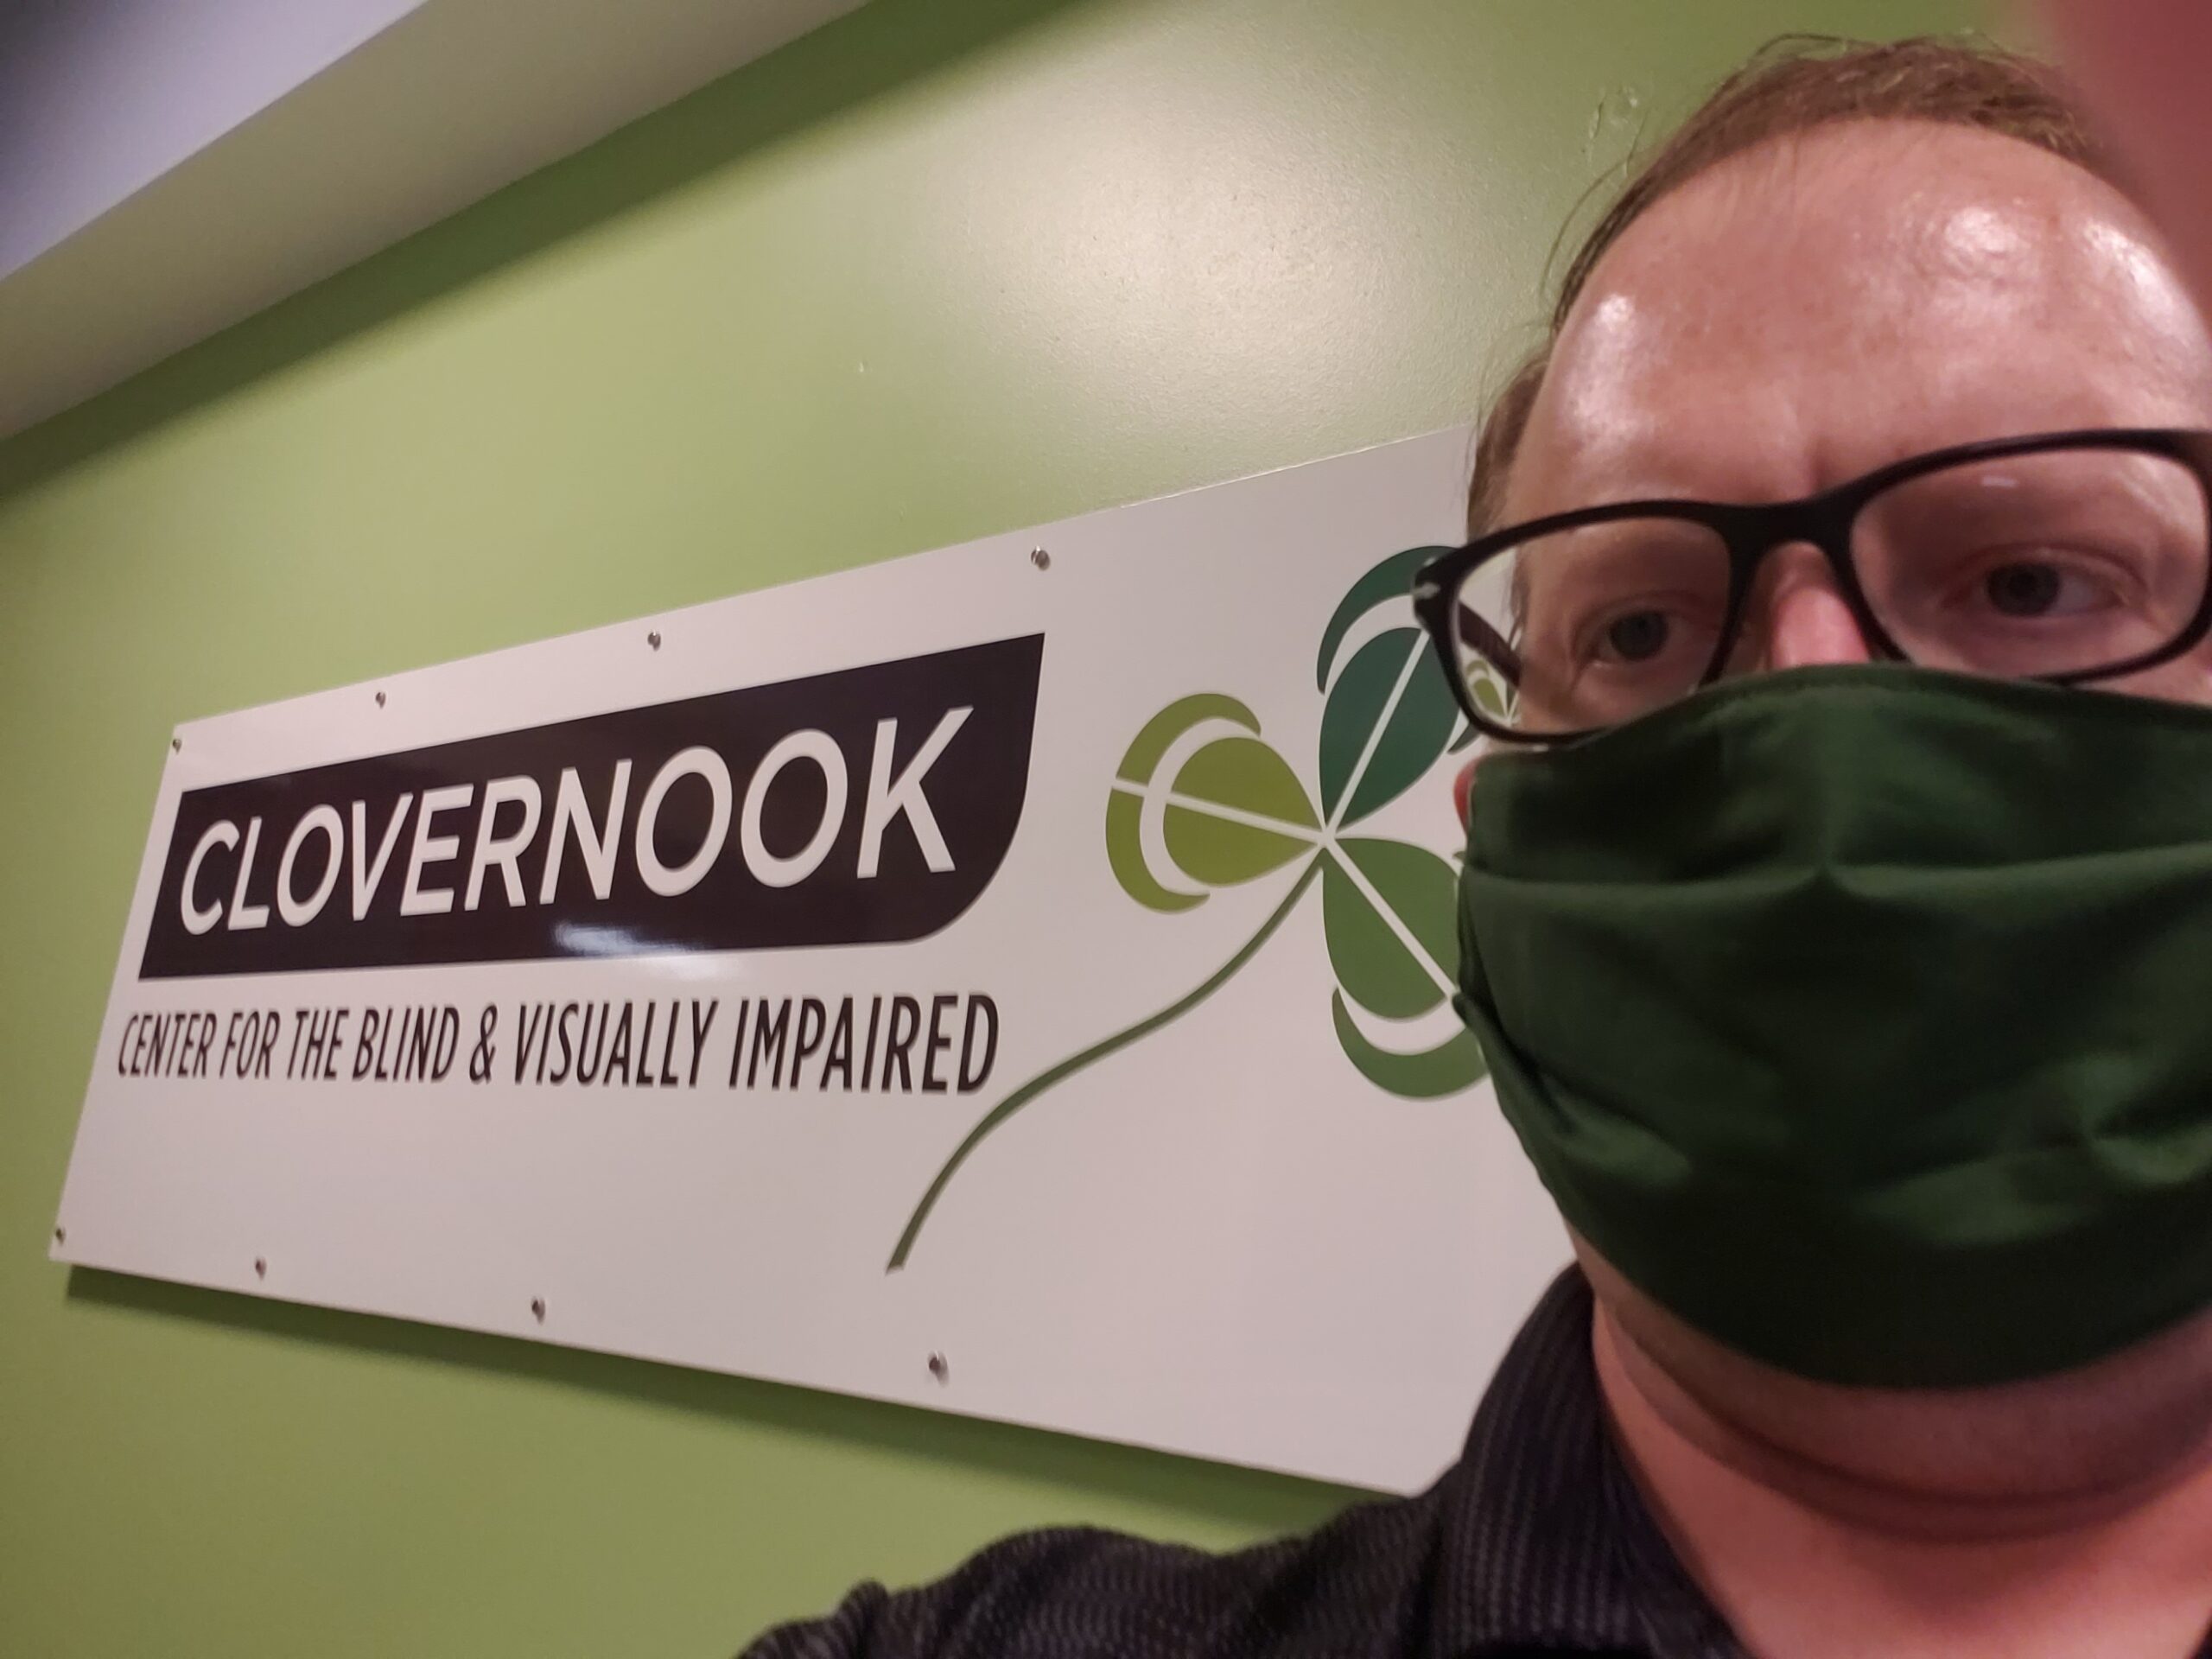 Photo of Isaac standing in front of a Clovernook Center sign wearing a green mask and glasses